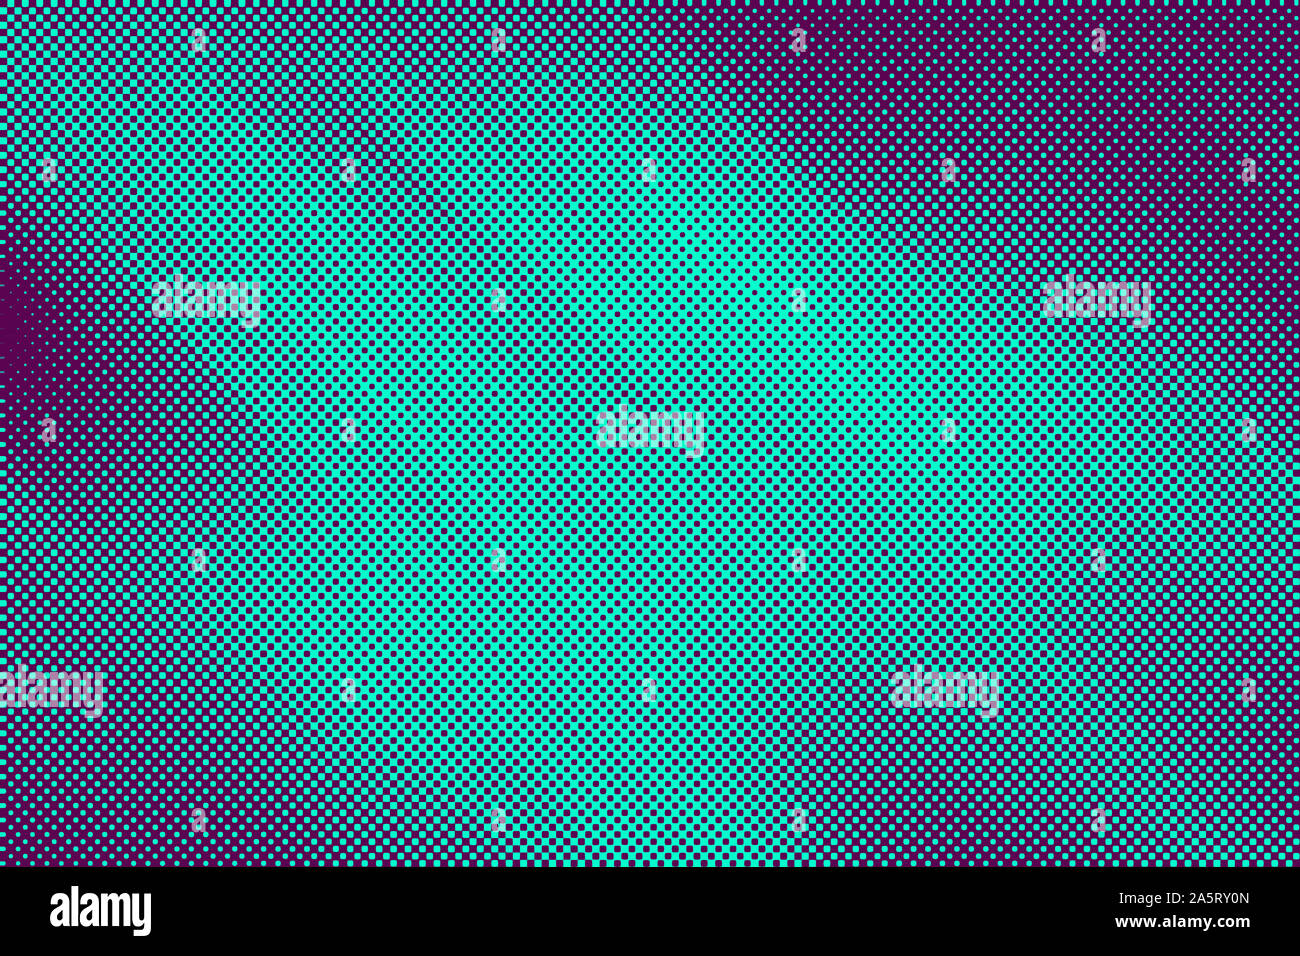 An abstract halftone background image. Stock Photo